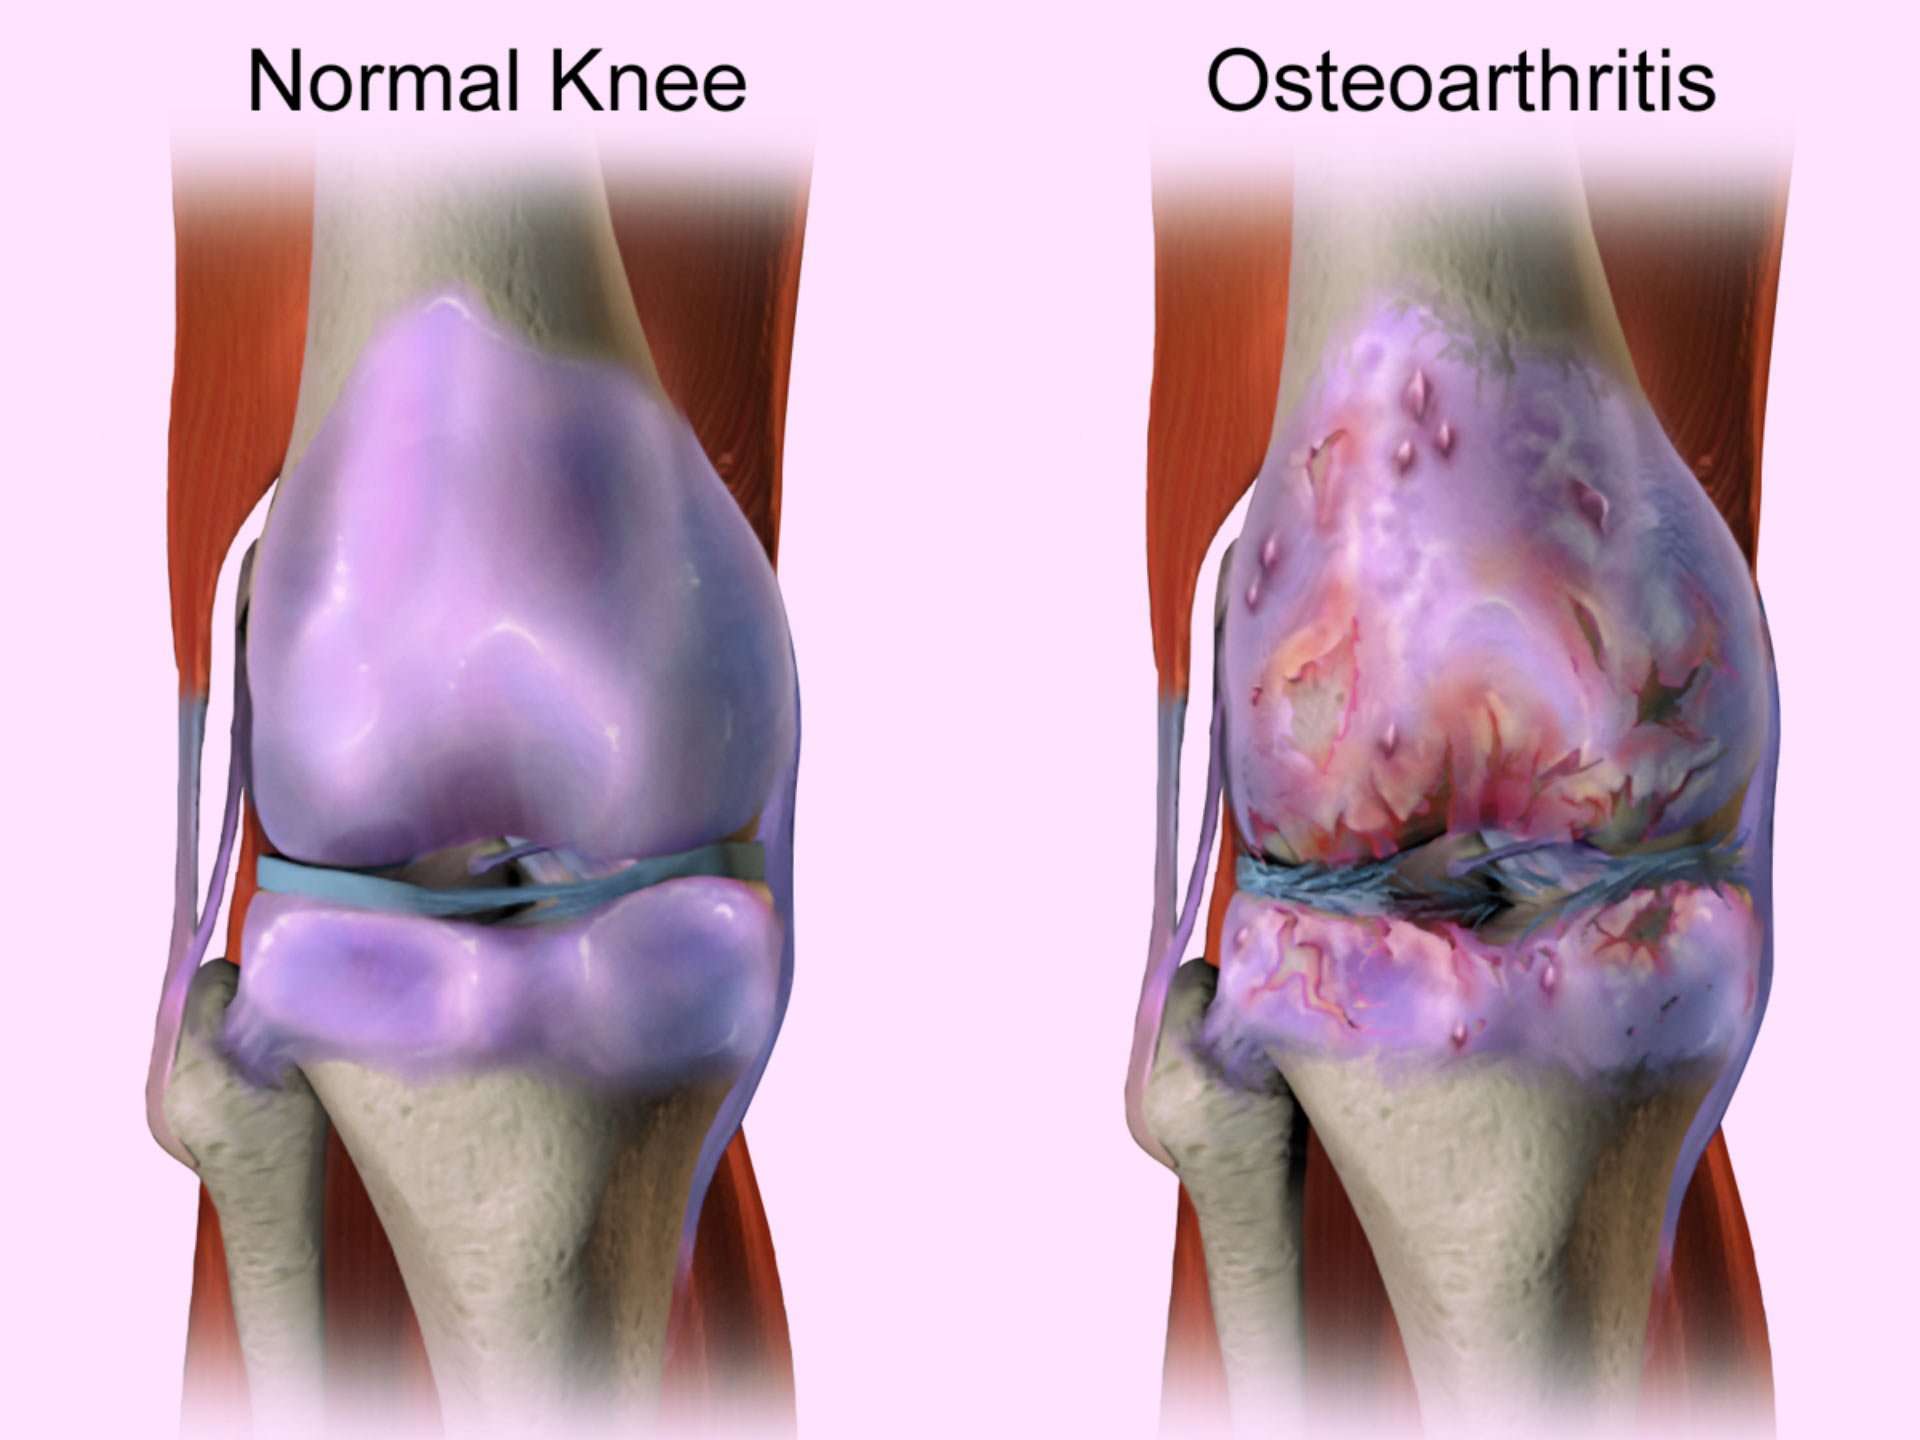 Menopausal Hormone Therapy Effective against Knee Osteoarthritis: Study ...